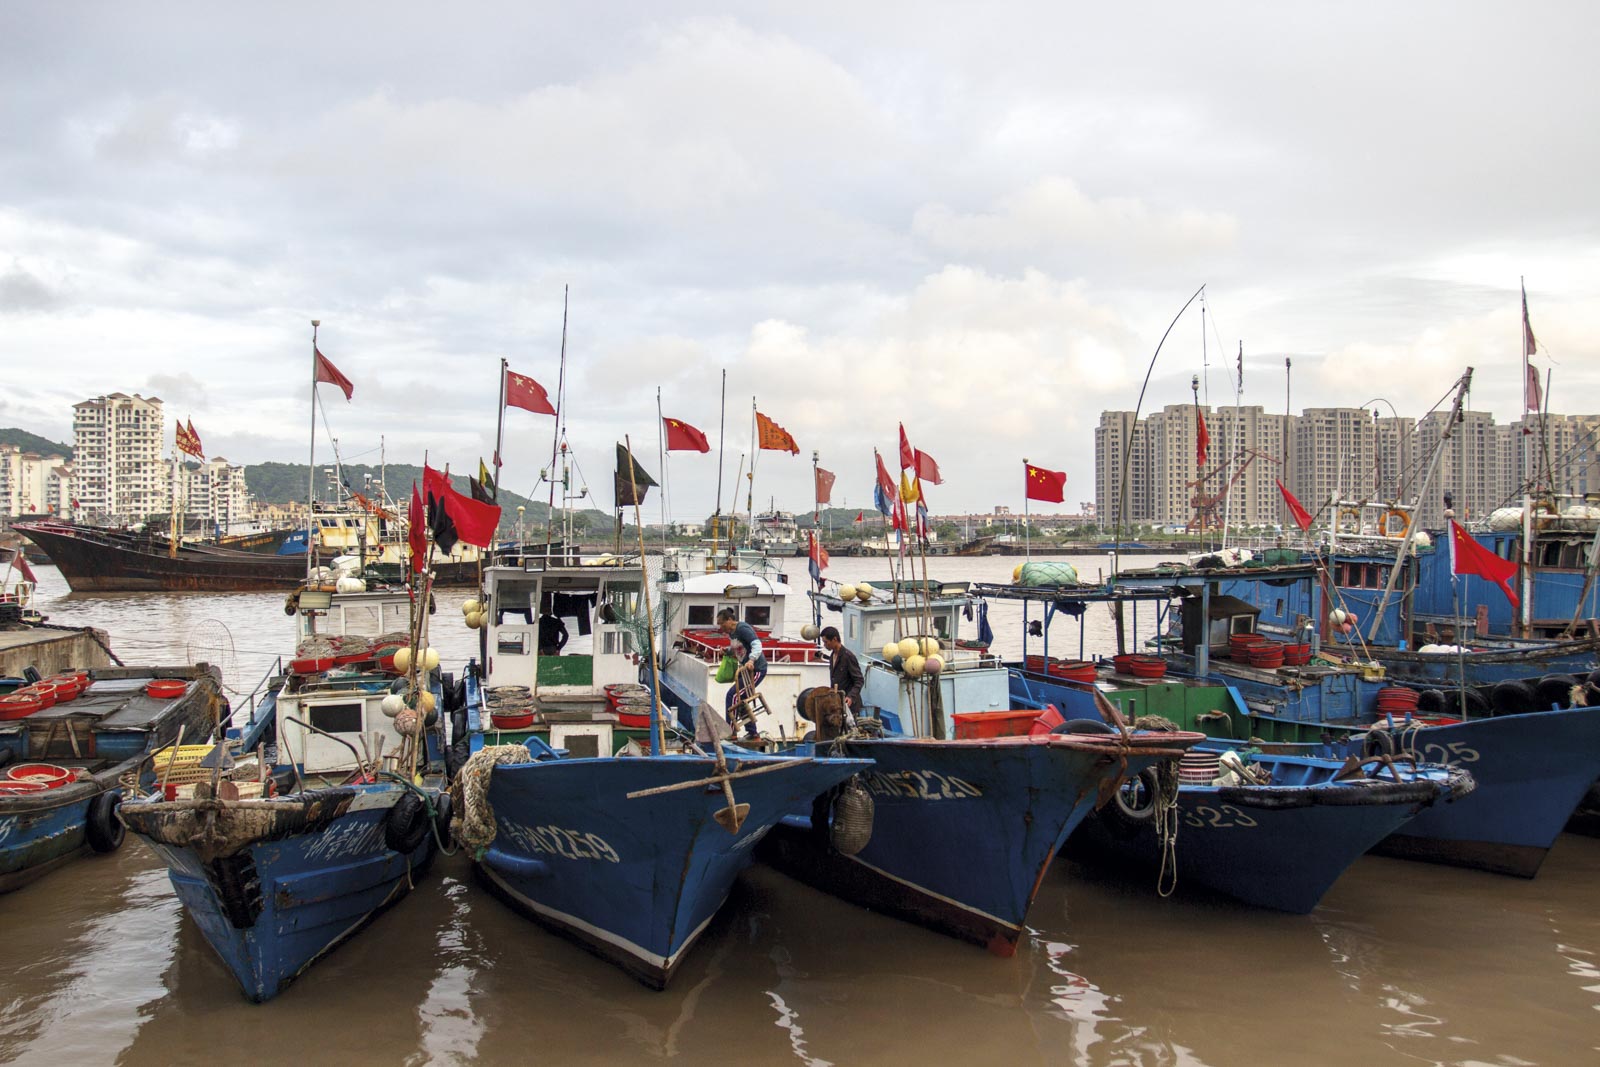 Fishing boats anchored in the port. From June.1, the